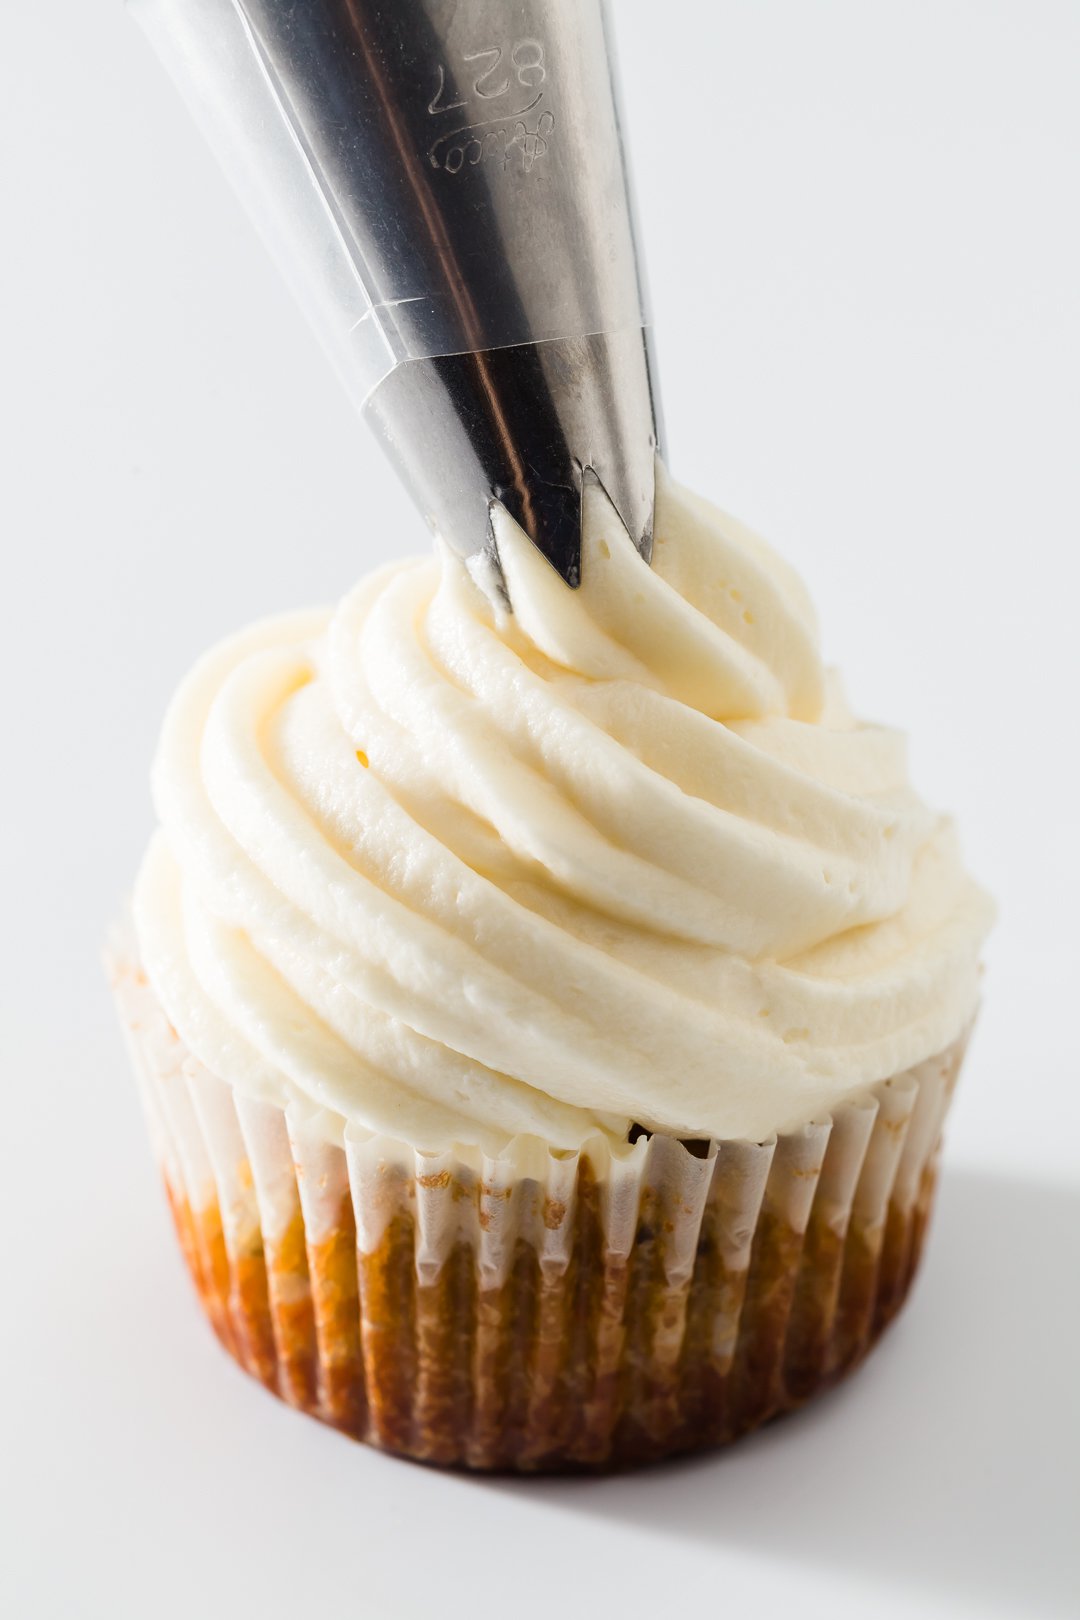 Cream cheese frosting on top of a cupcake